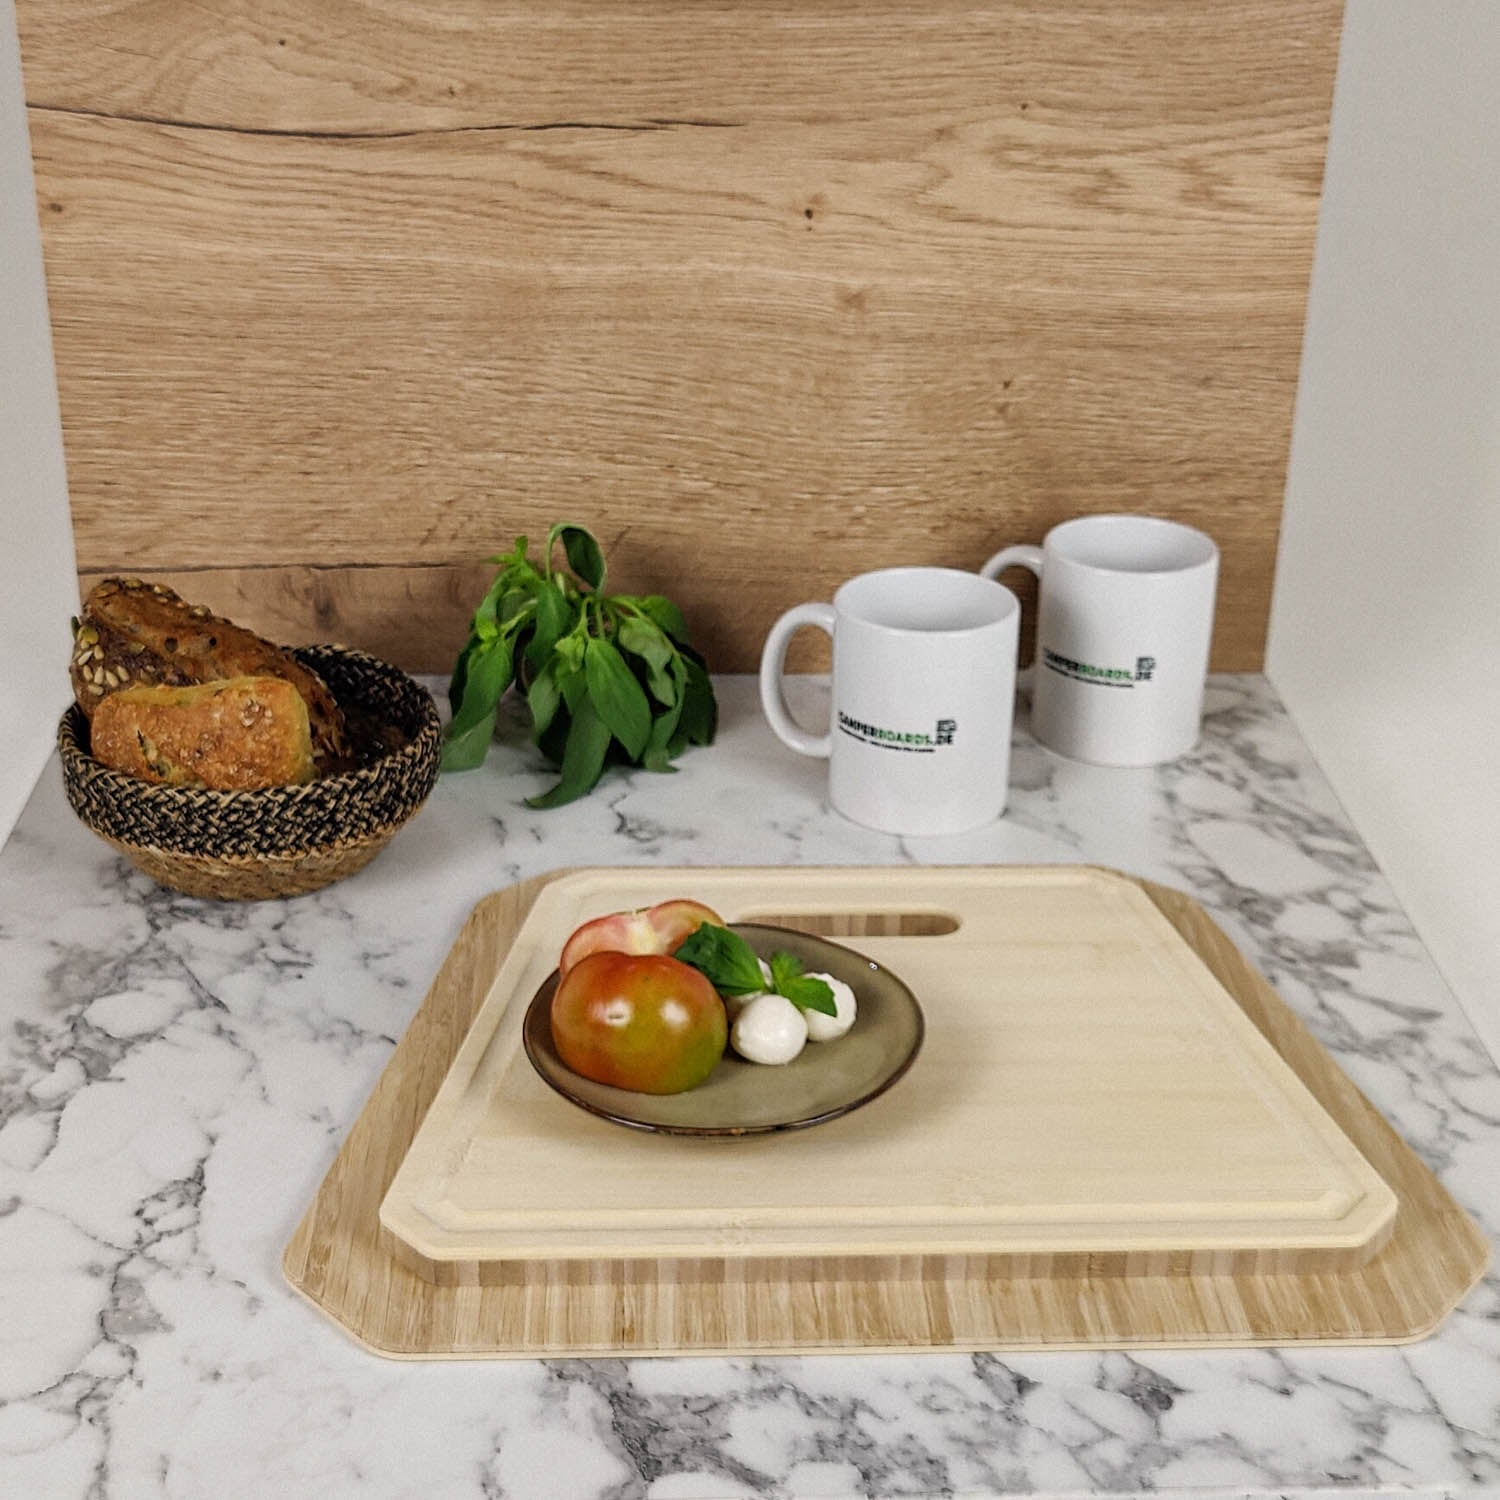 Cutting board with sink cover for Adria models